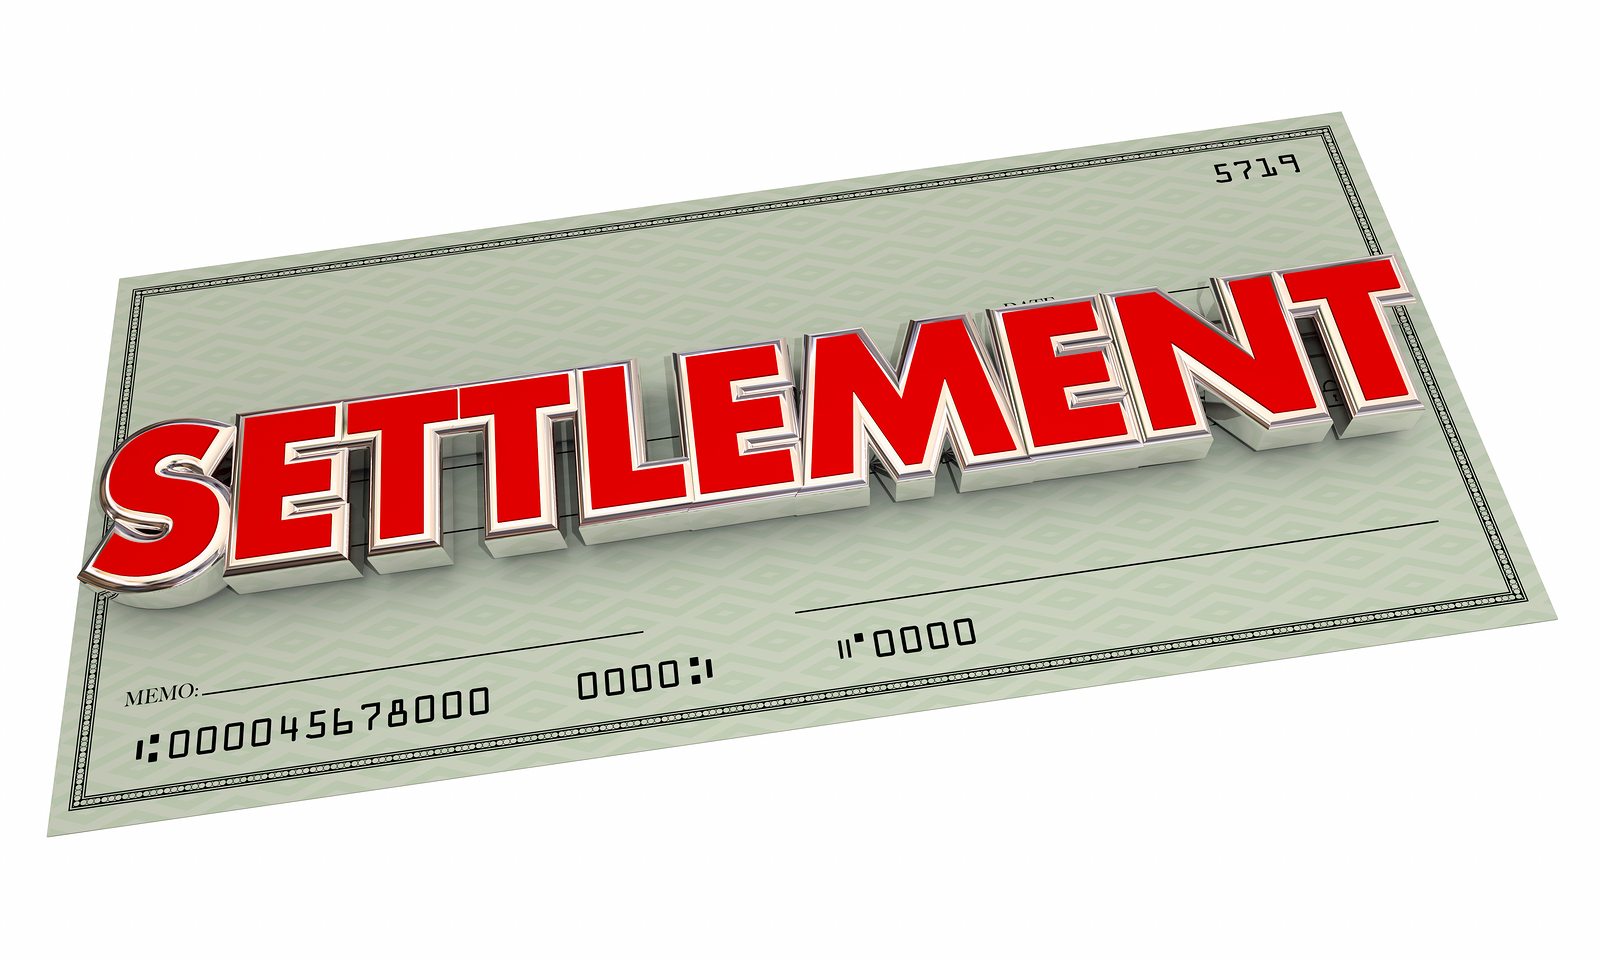 Settlement Check Agreement Payout Word 3d Illustration